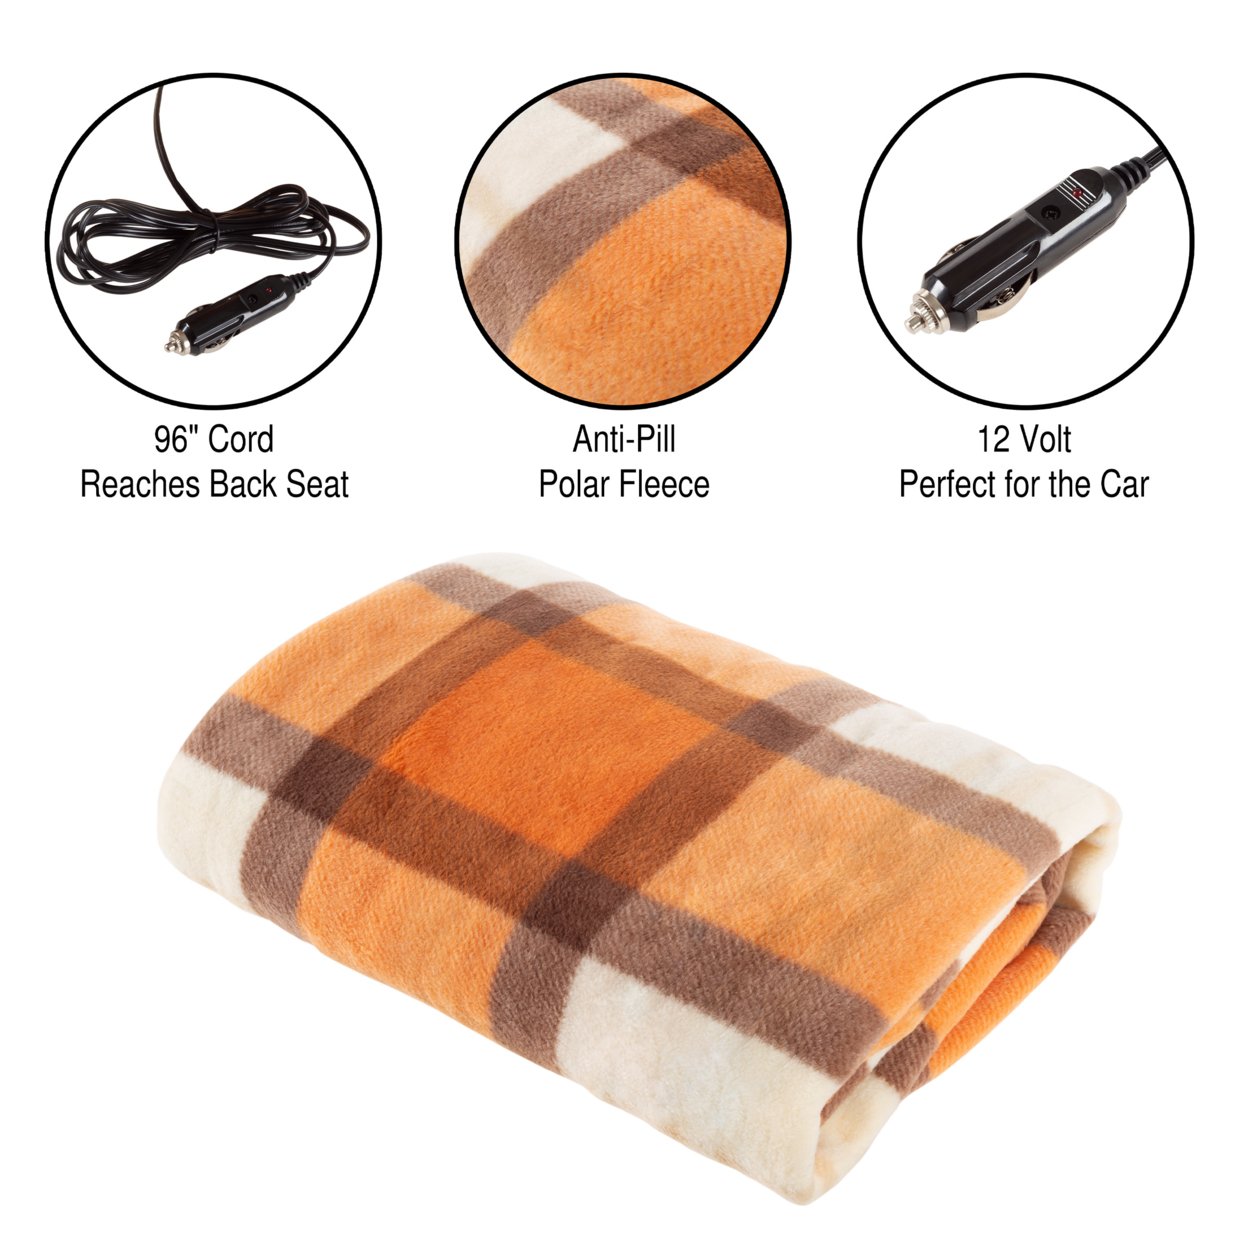 Electric Car Blanket- Heated 12V Polar Fleece Travel Throw For Car, Truck & RV-Great For Cold Weather Orange Plaid